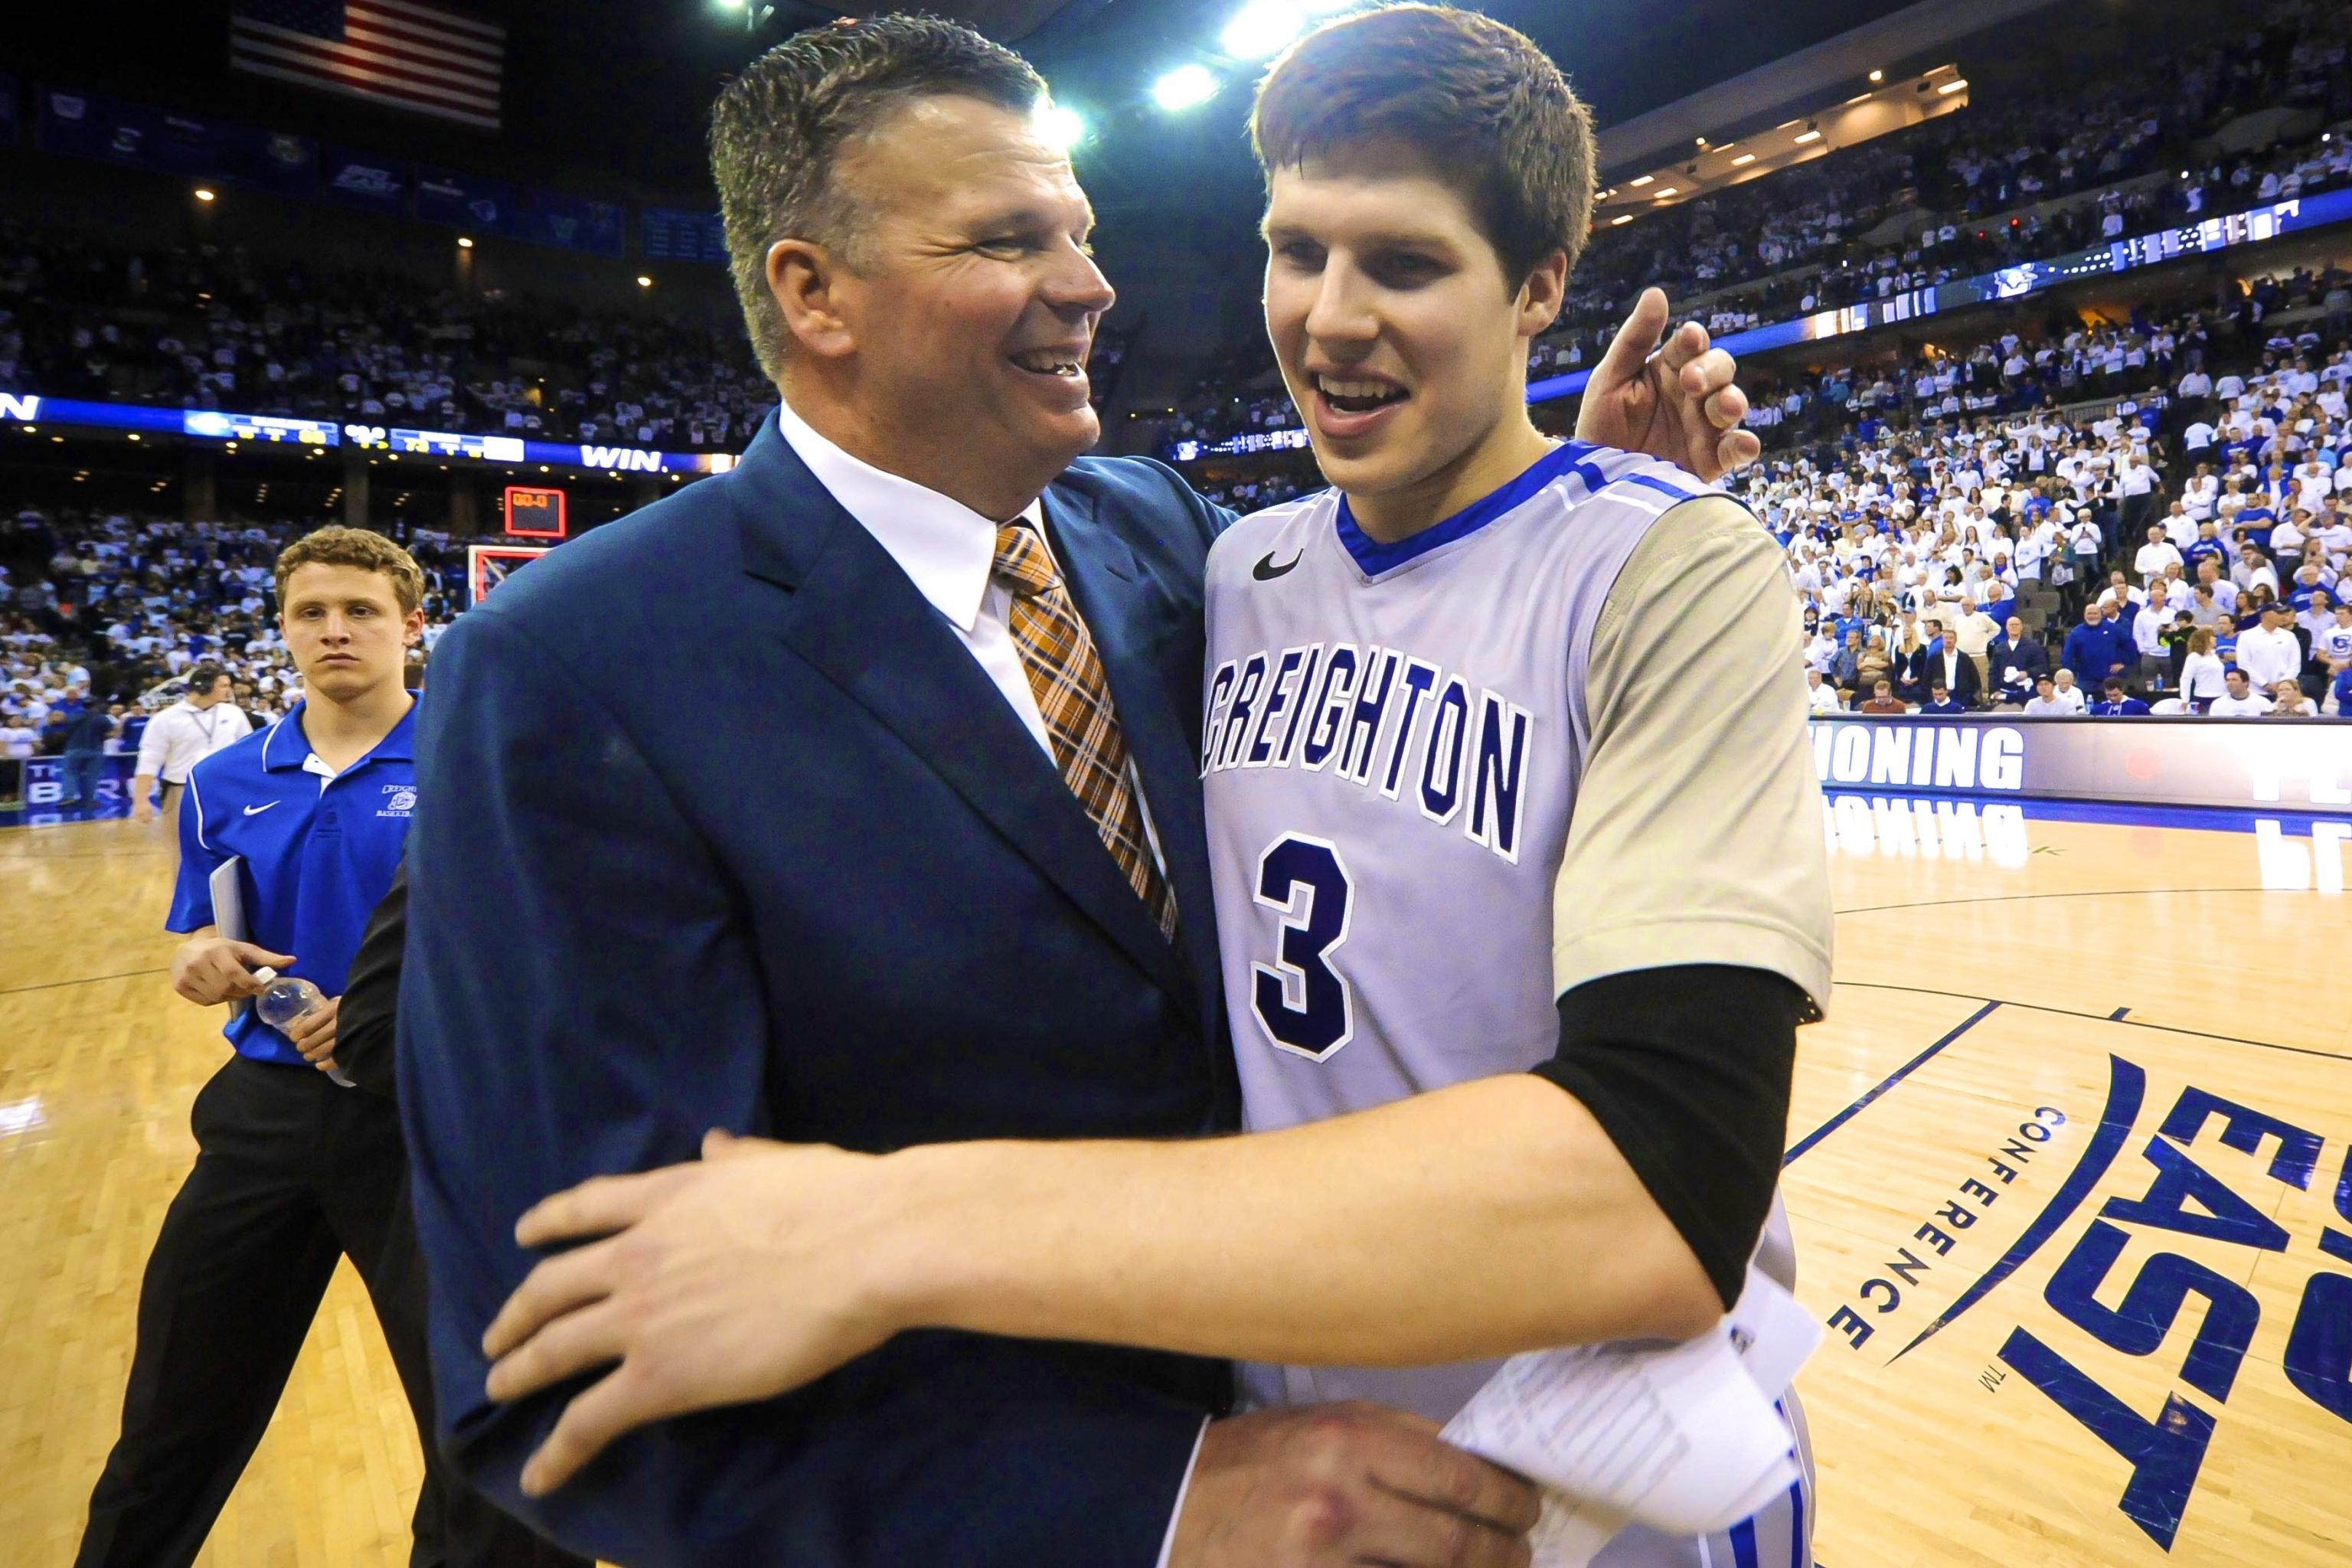 5 things you might not know about Doug McDermott